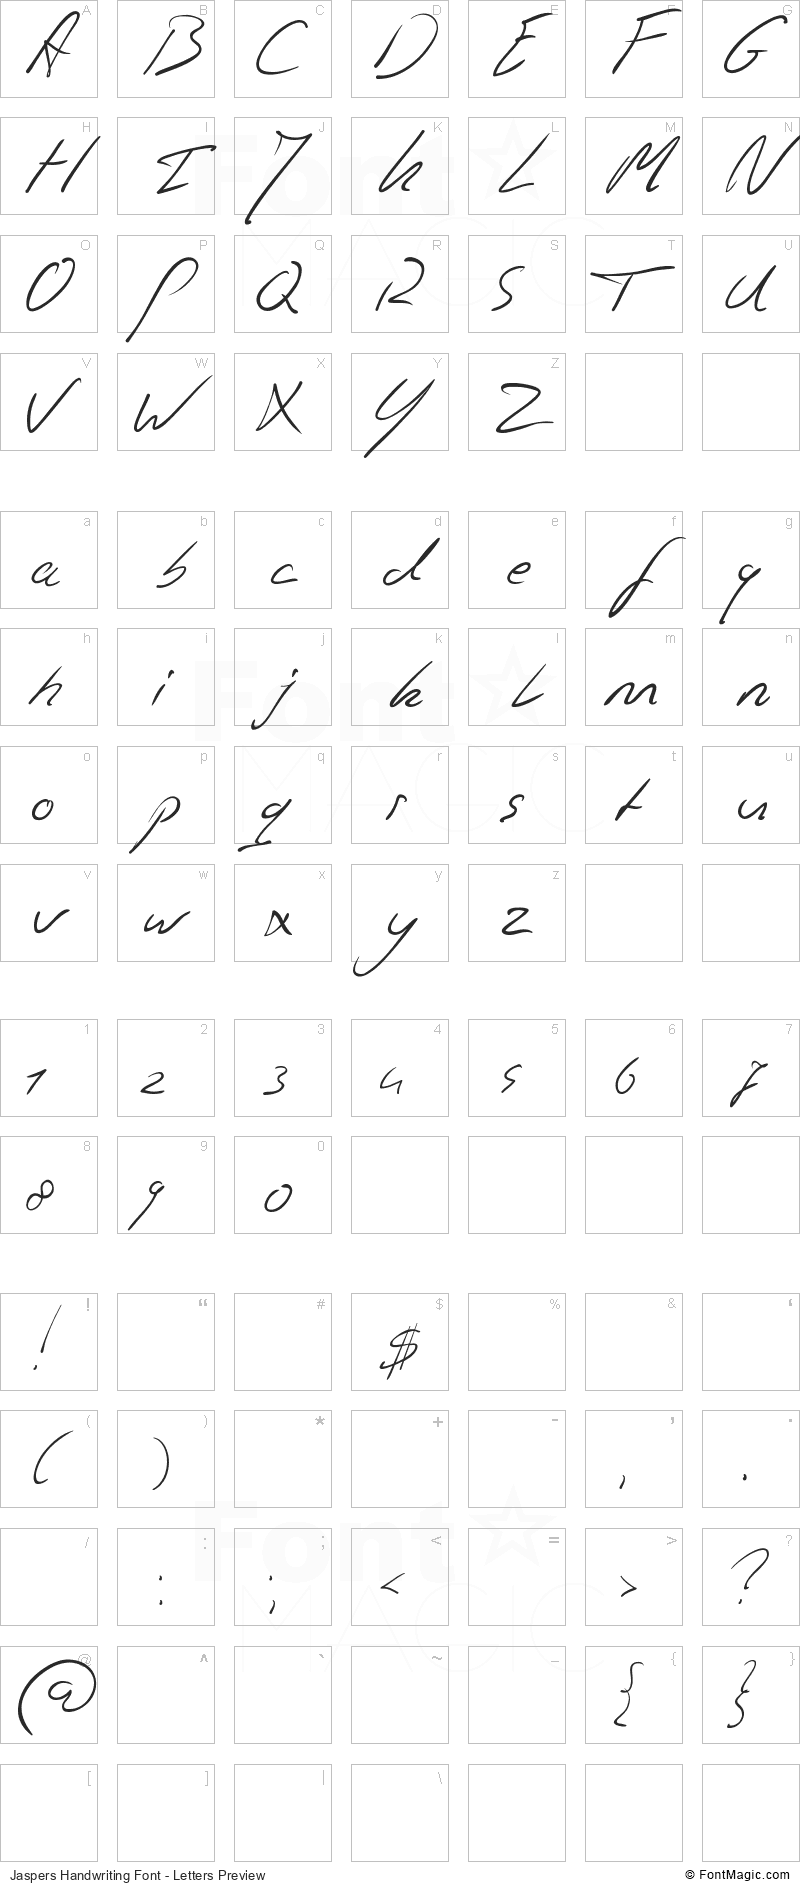 Jaspers Handwriting Font - All Latters Preview Chart